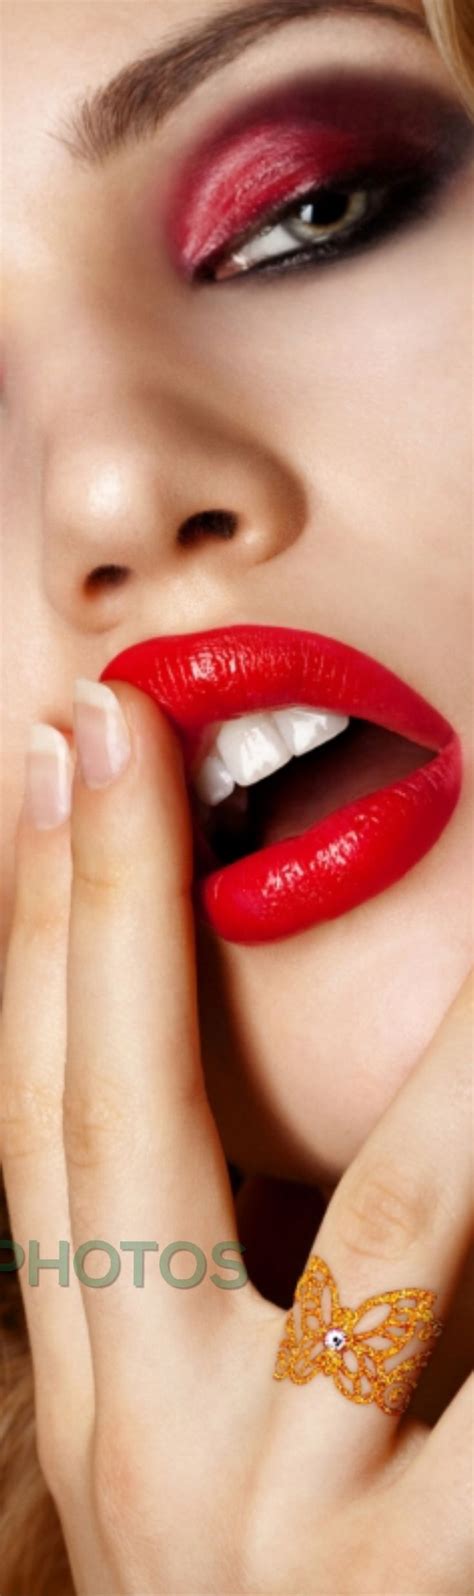 Pin By Mr T Capello On Sexy Eyes Sexy Lips And Make Up Nailsand More Sexy Lips Sexy Eyes